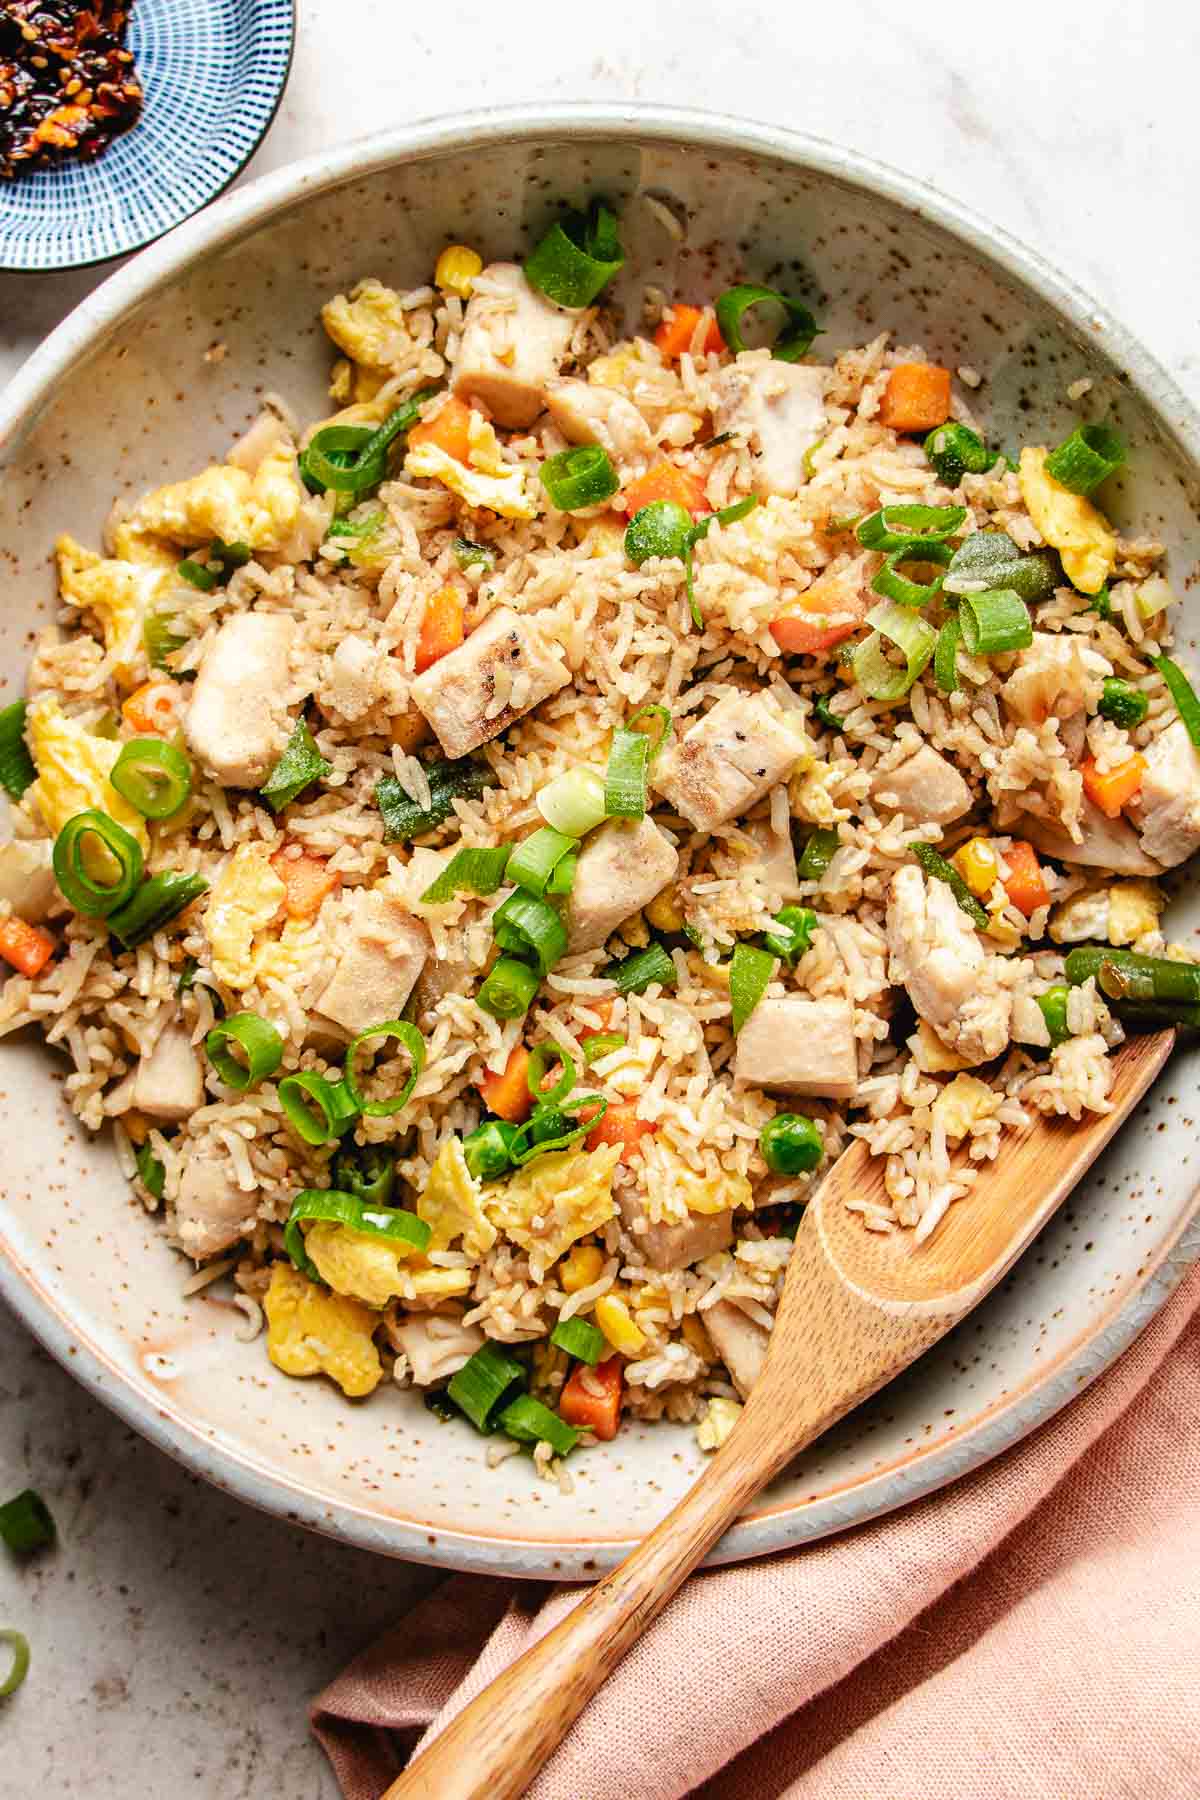 A feature image shows leftover turkey fried rice served on a white plate.